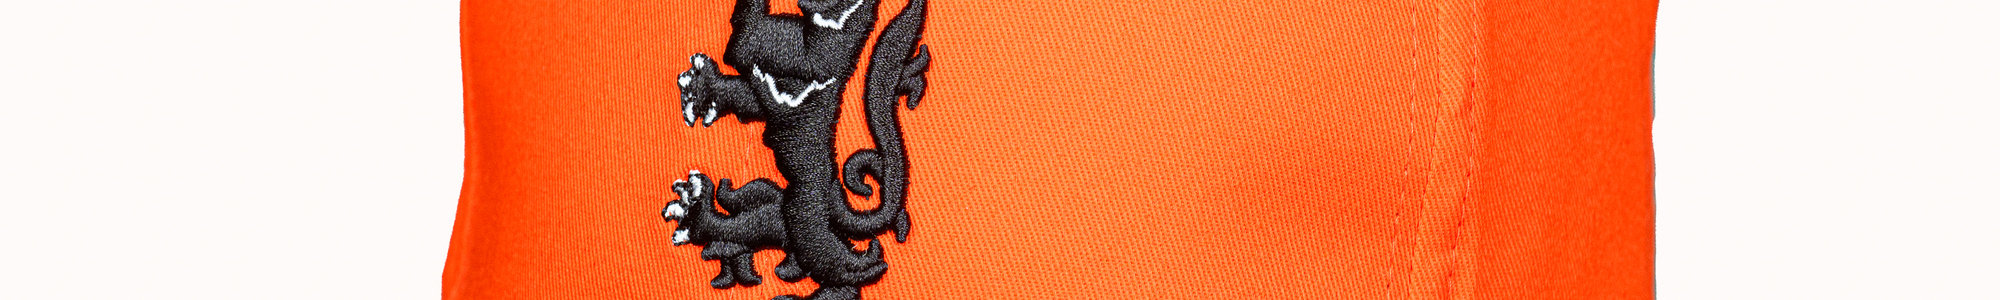          Hats & Scarves on Dundee United Football Club